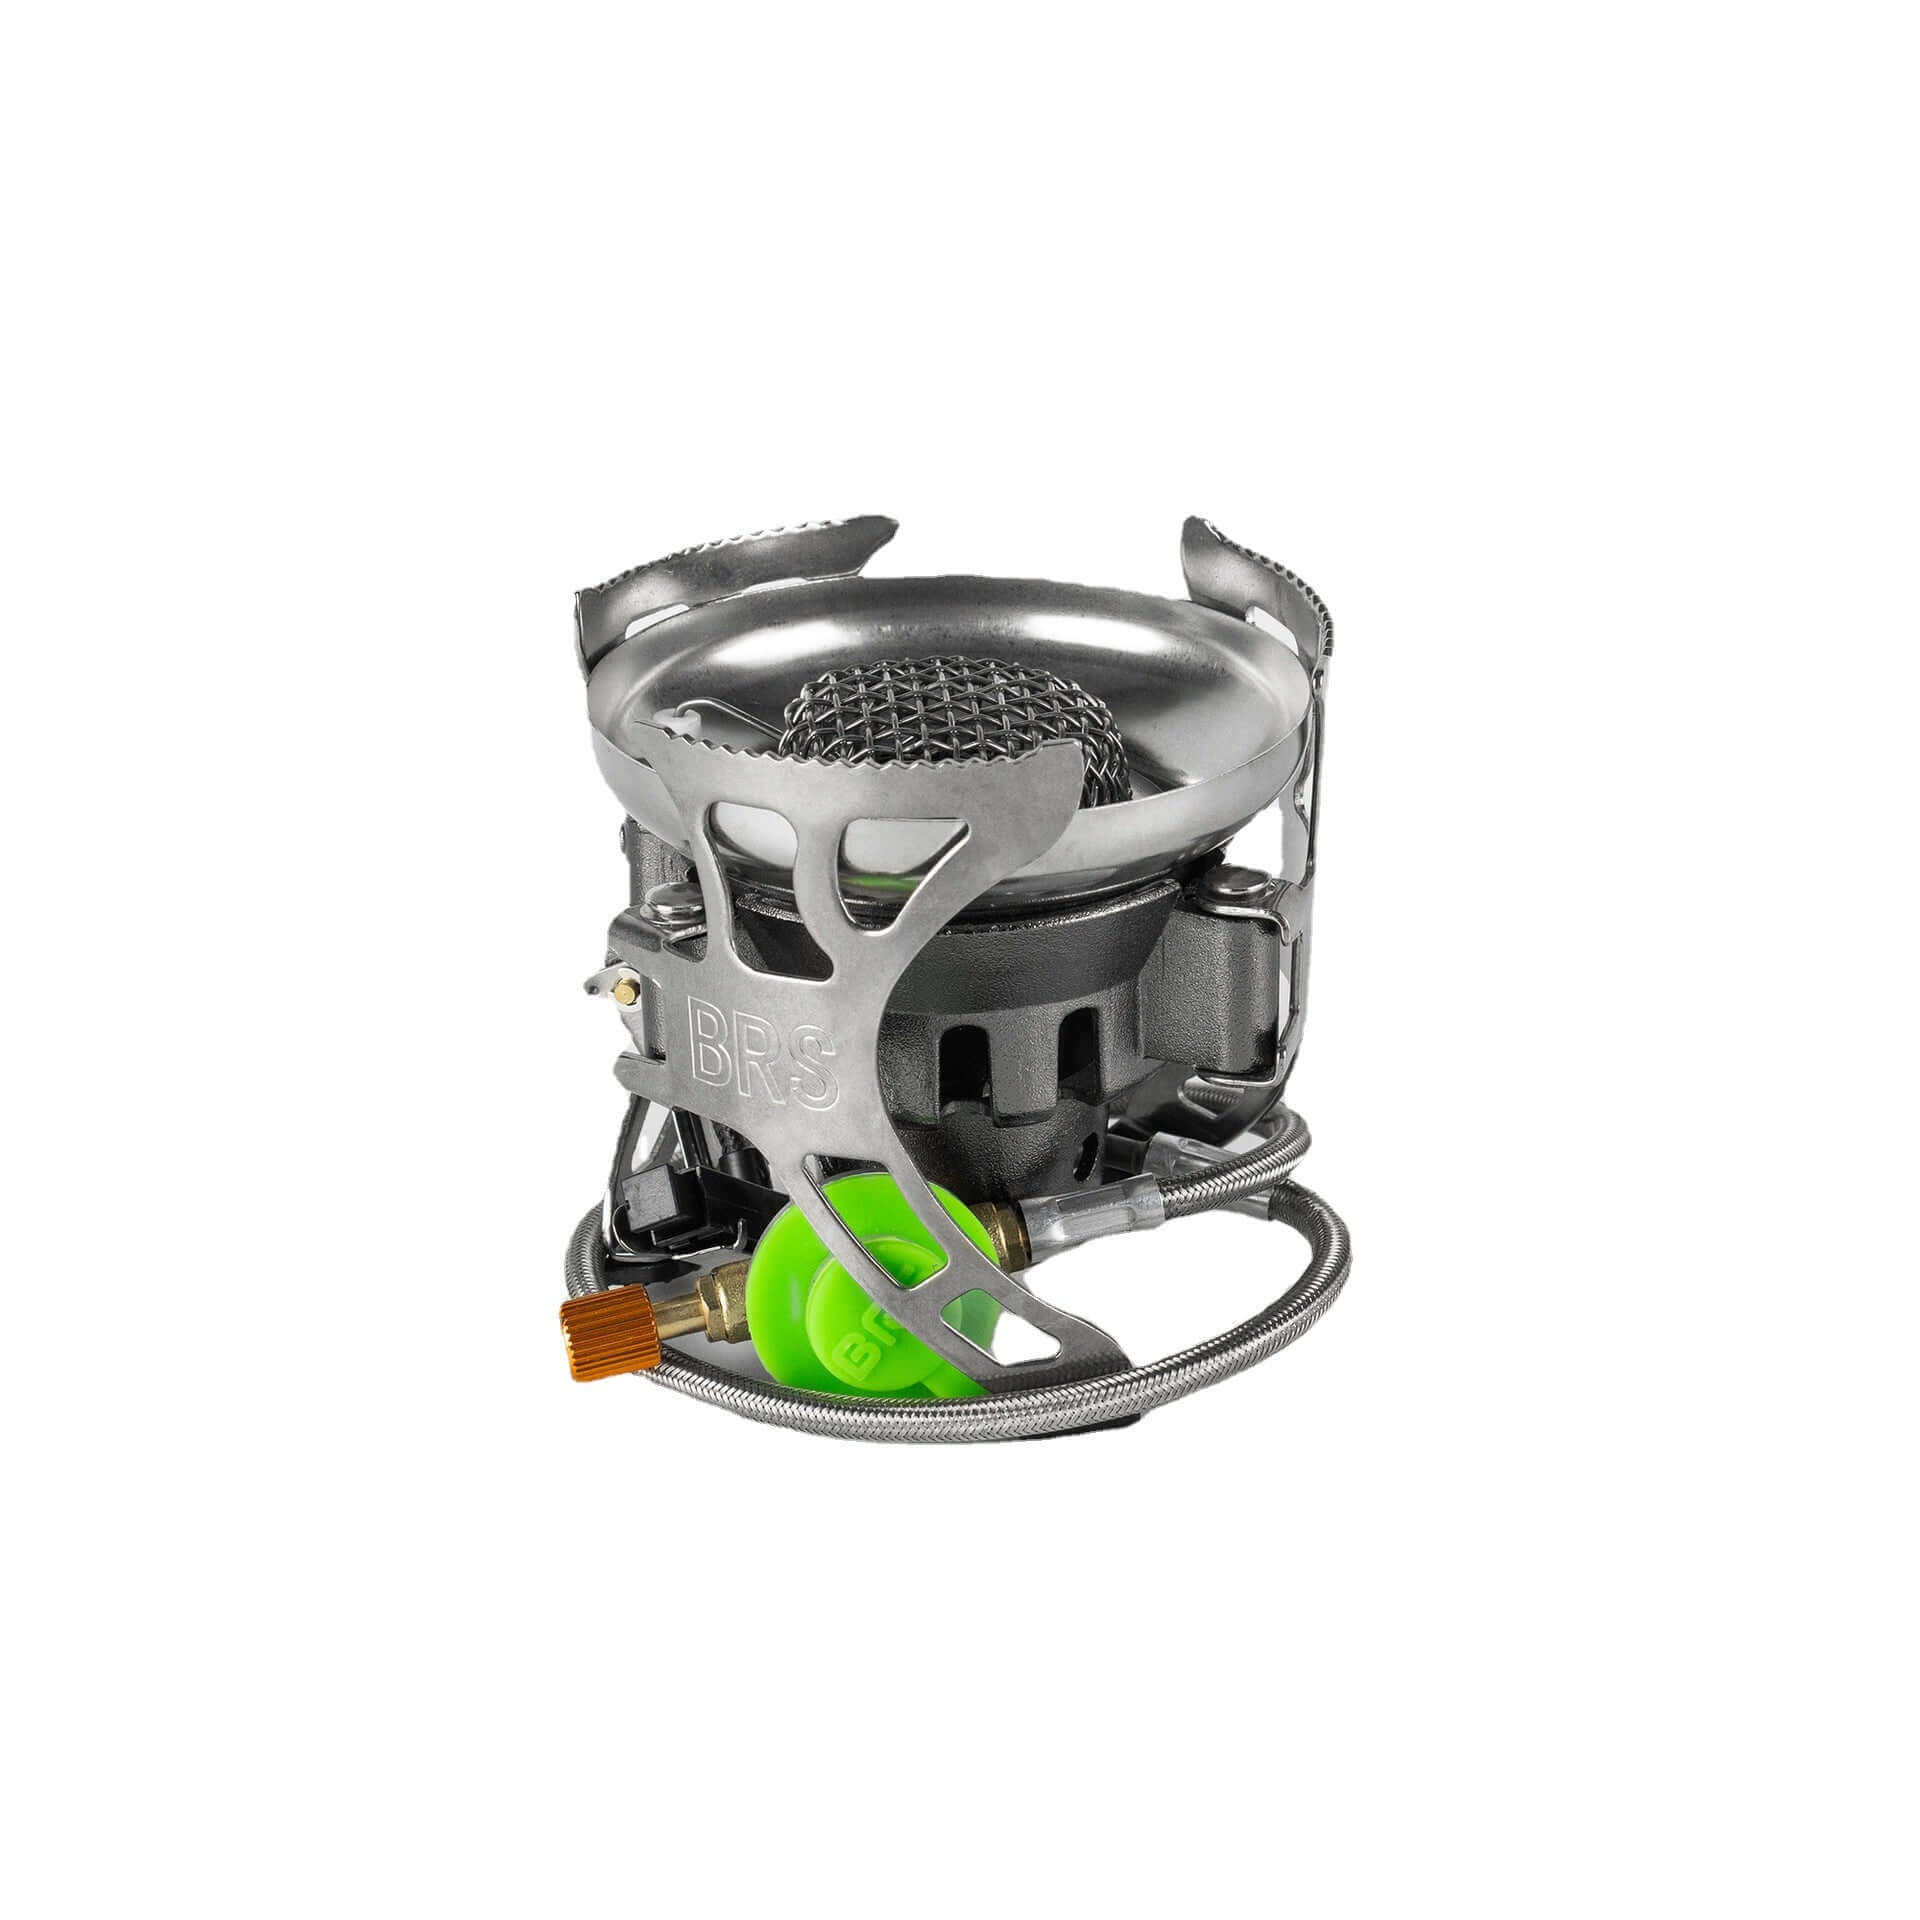 BRS-15 Multifunctional Windproof Camping Gas Stove